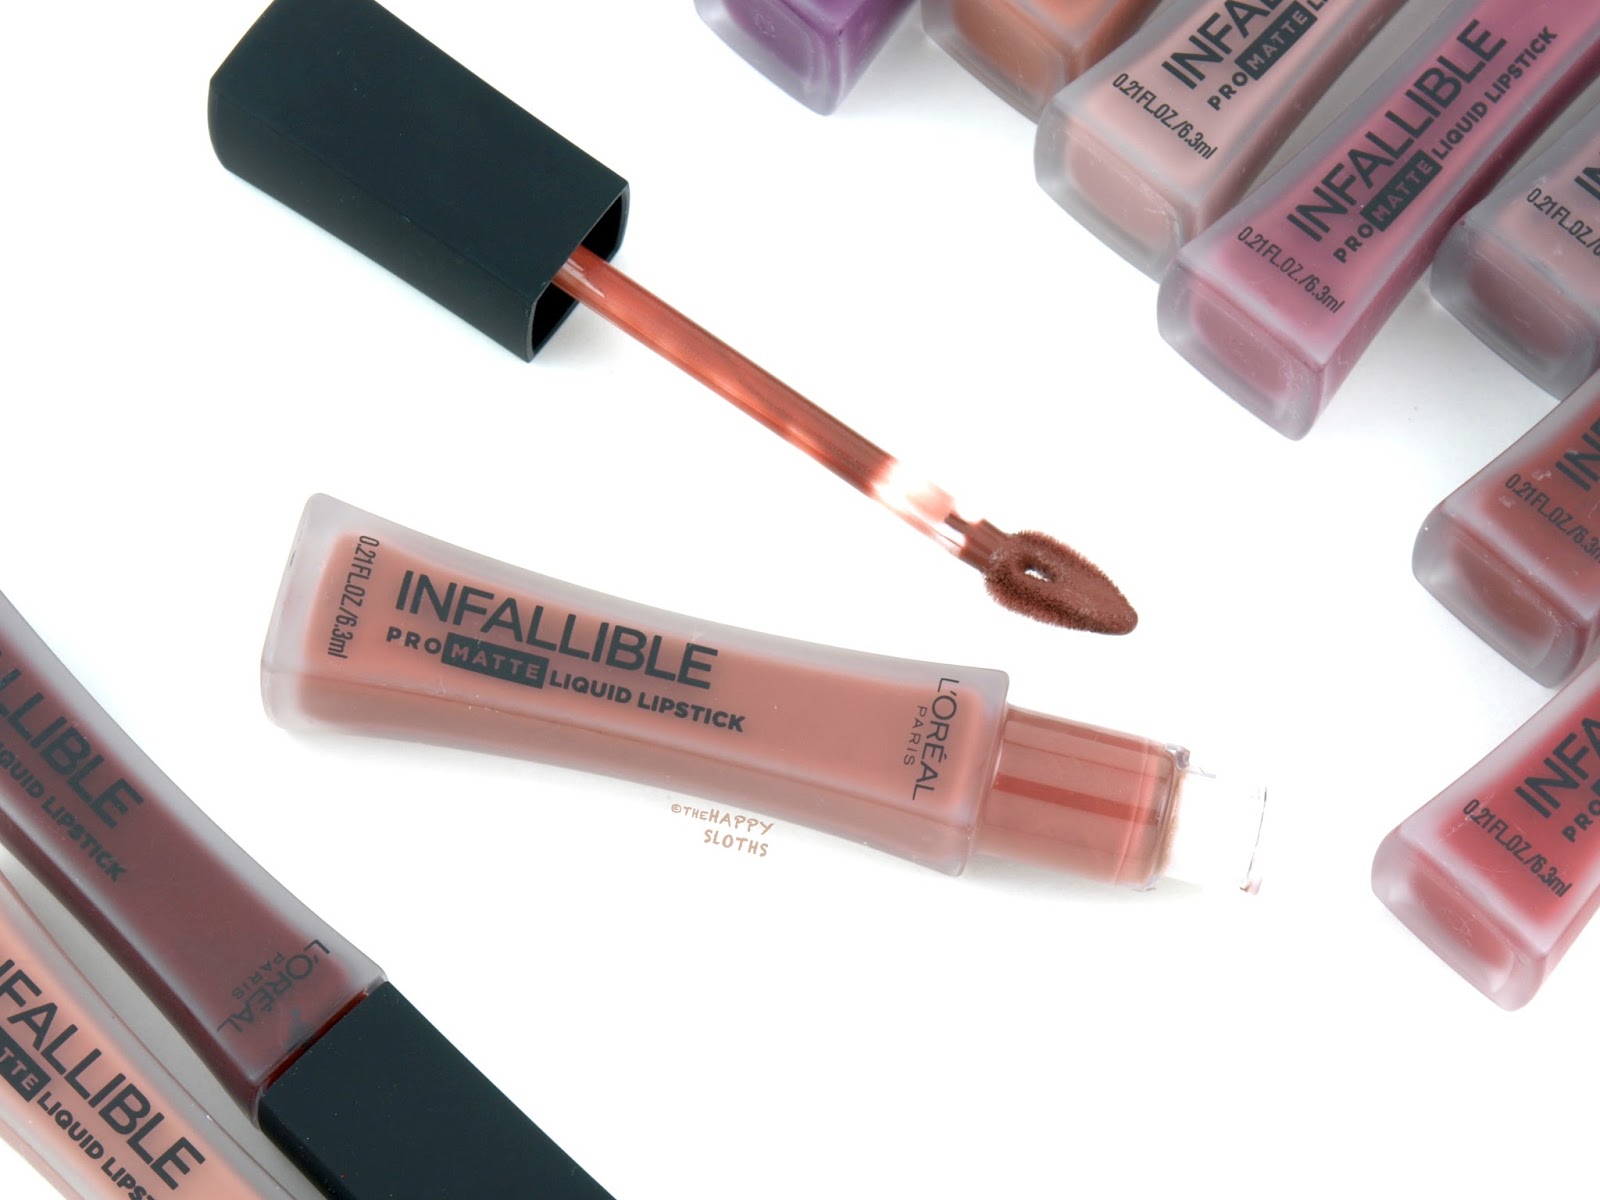 L'Oreal Infallible Pro Matte Liquid Lipsticks: Review and Swatches